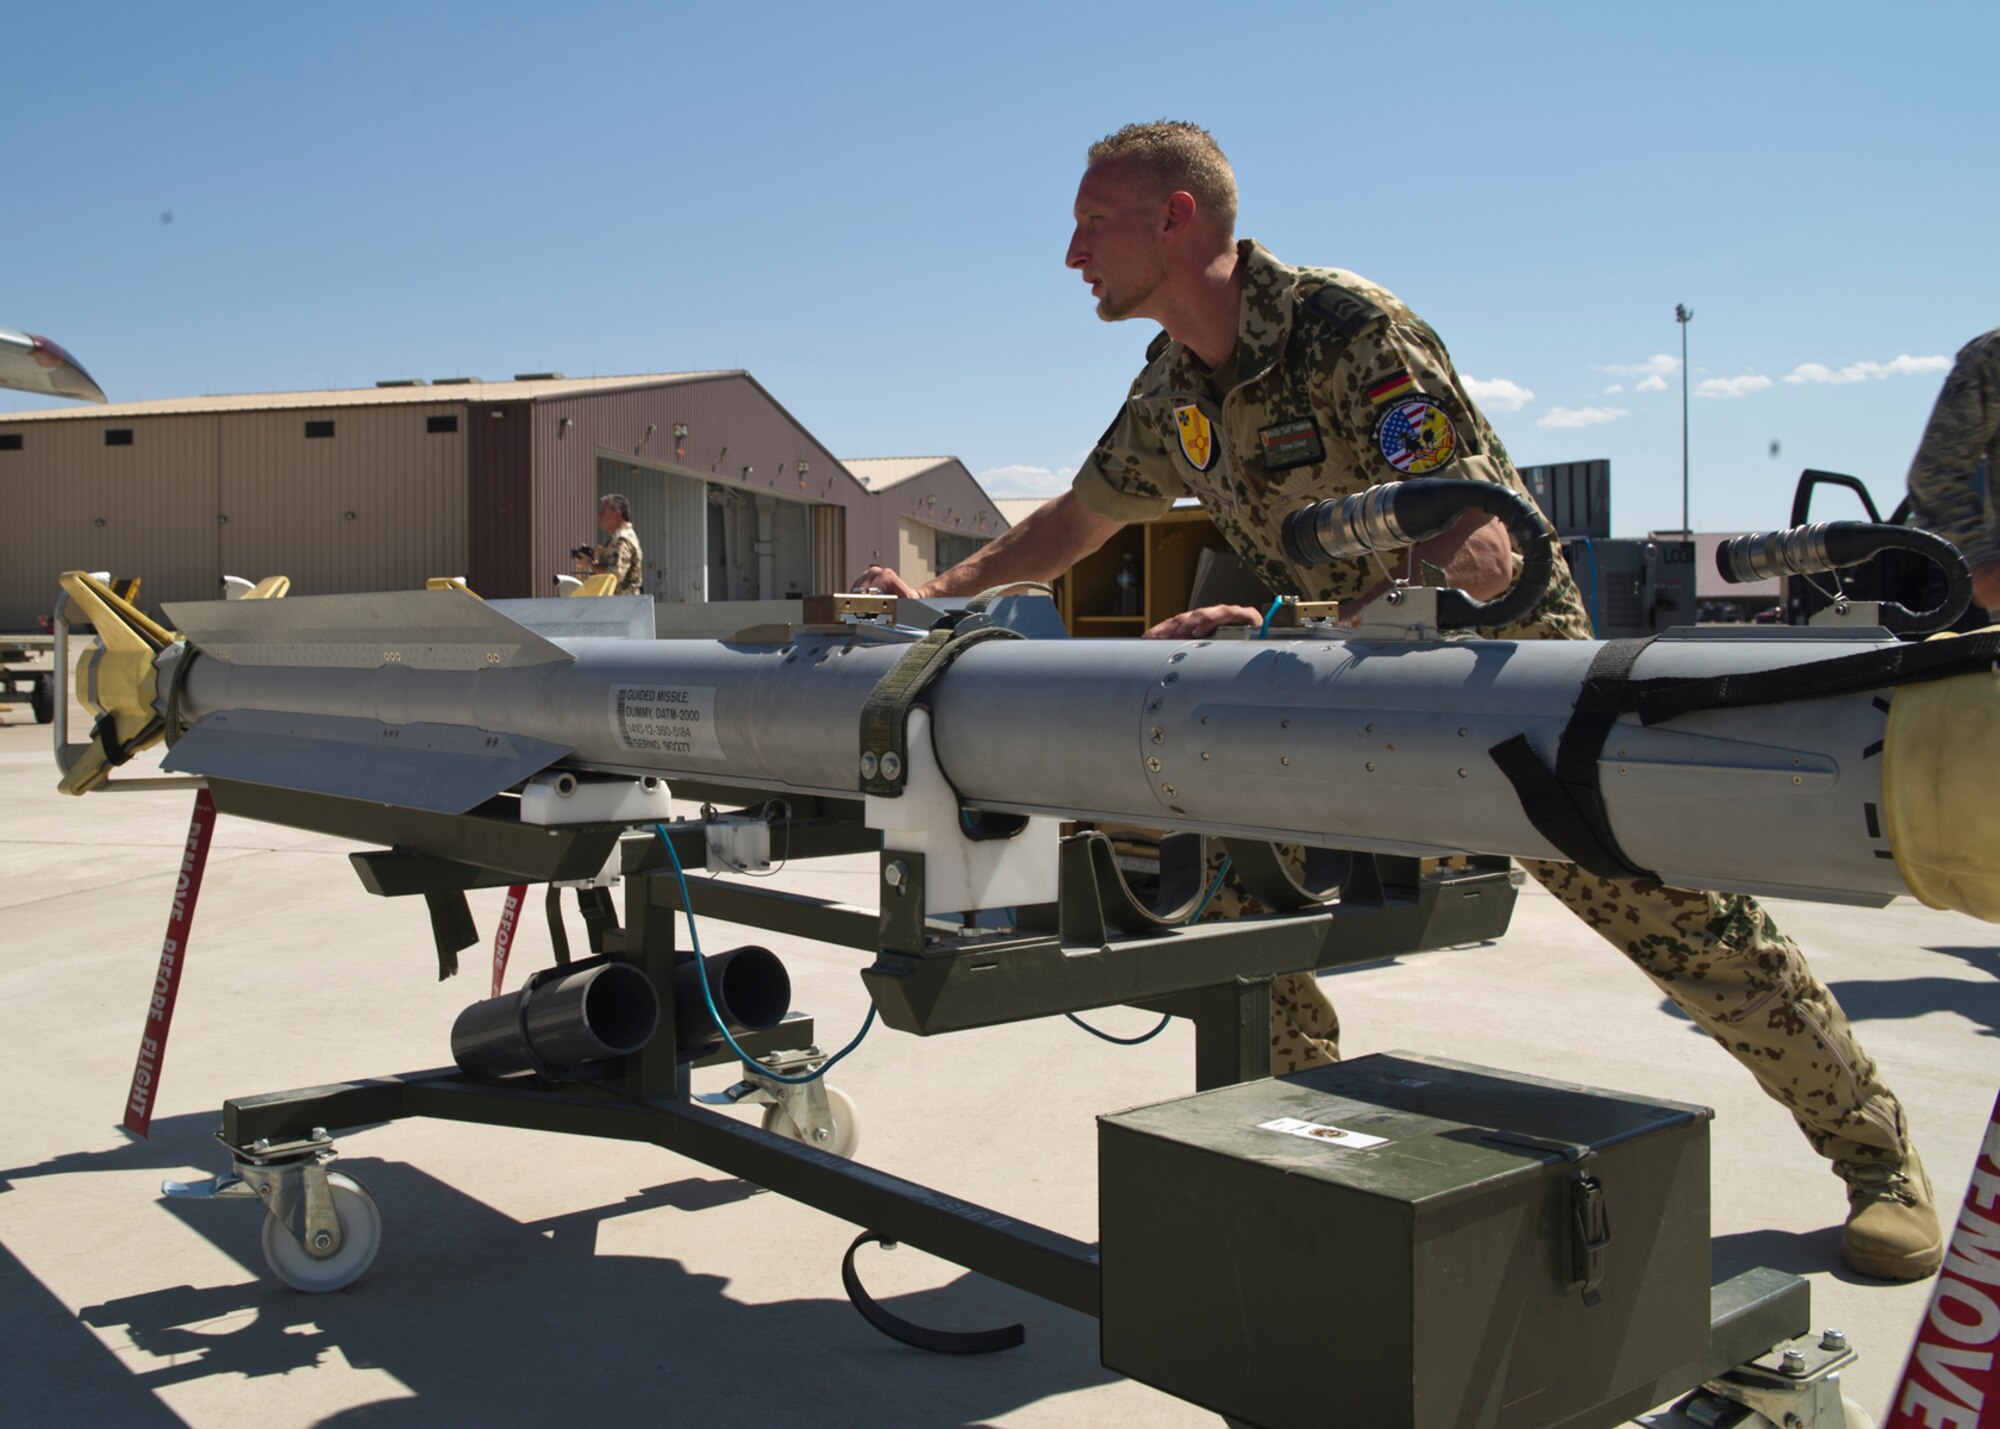 HOLLOMAN AIR FORCE BASE, N.M. -- German Air Force Tech. Sgt. Jens Feddersan, crew chief, pushes an AIM-2000 air-to-air missile toward a Tornado, July 8, 2011, during a quarterly load crew competition. During a competition, each member has a set of tasks to carry out and work in teams of three or four, depending on the aircraft. The GAF crew chiefs were competing for the first time against the 49th Maintenance Group for the title of “Best Load Crew.” (U.S. Air Force photo by Airman 1st Class Joshua Turner/Released)